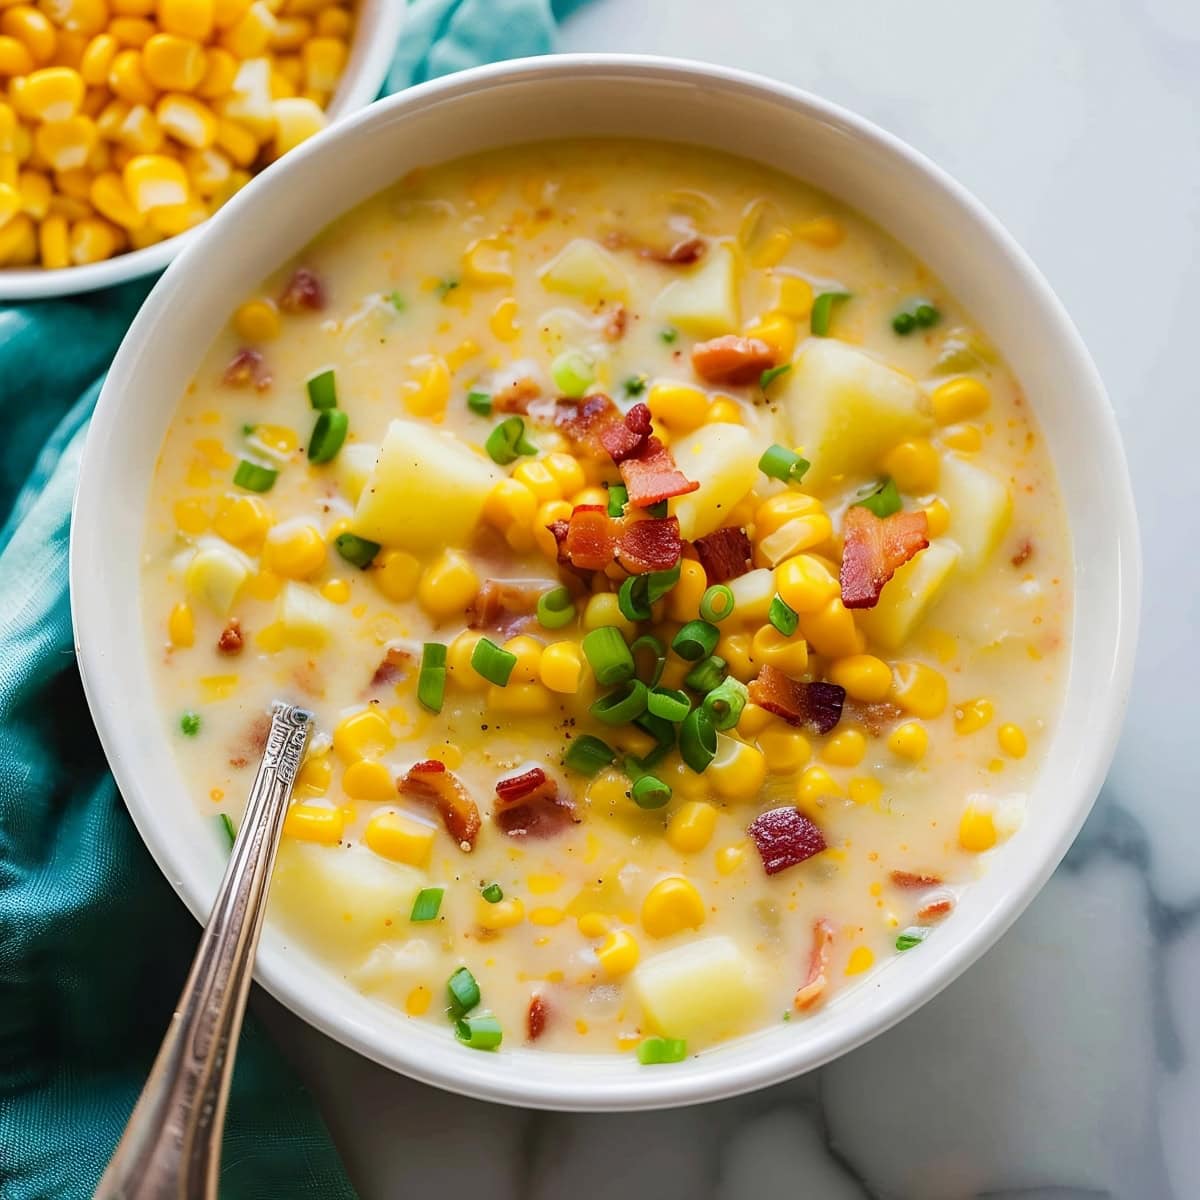 Hearty corn chowder, featuring tender corn kernels and diced potatoes in a rich broth.